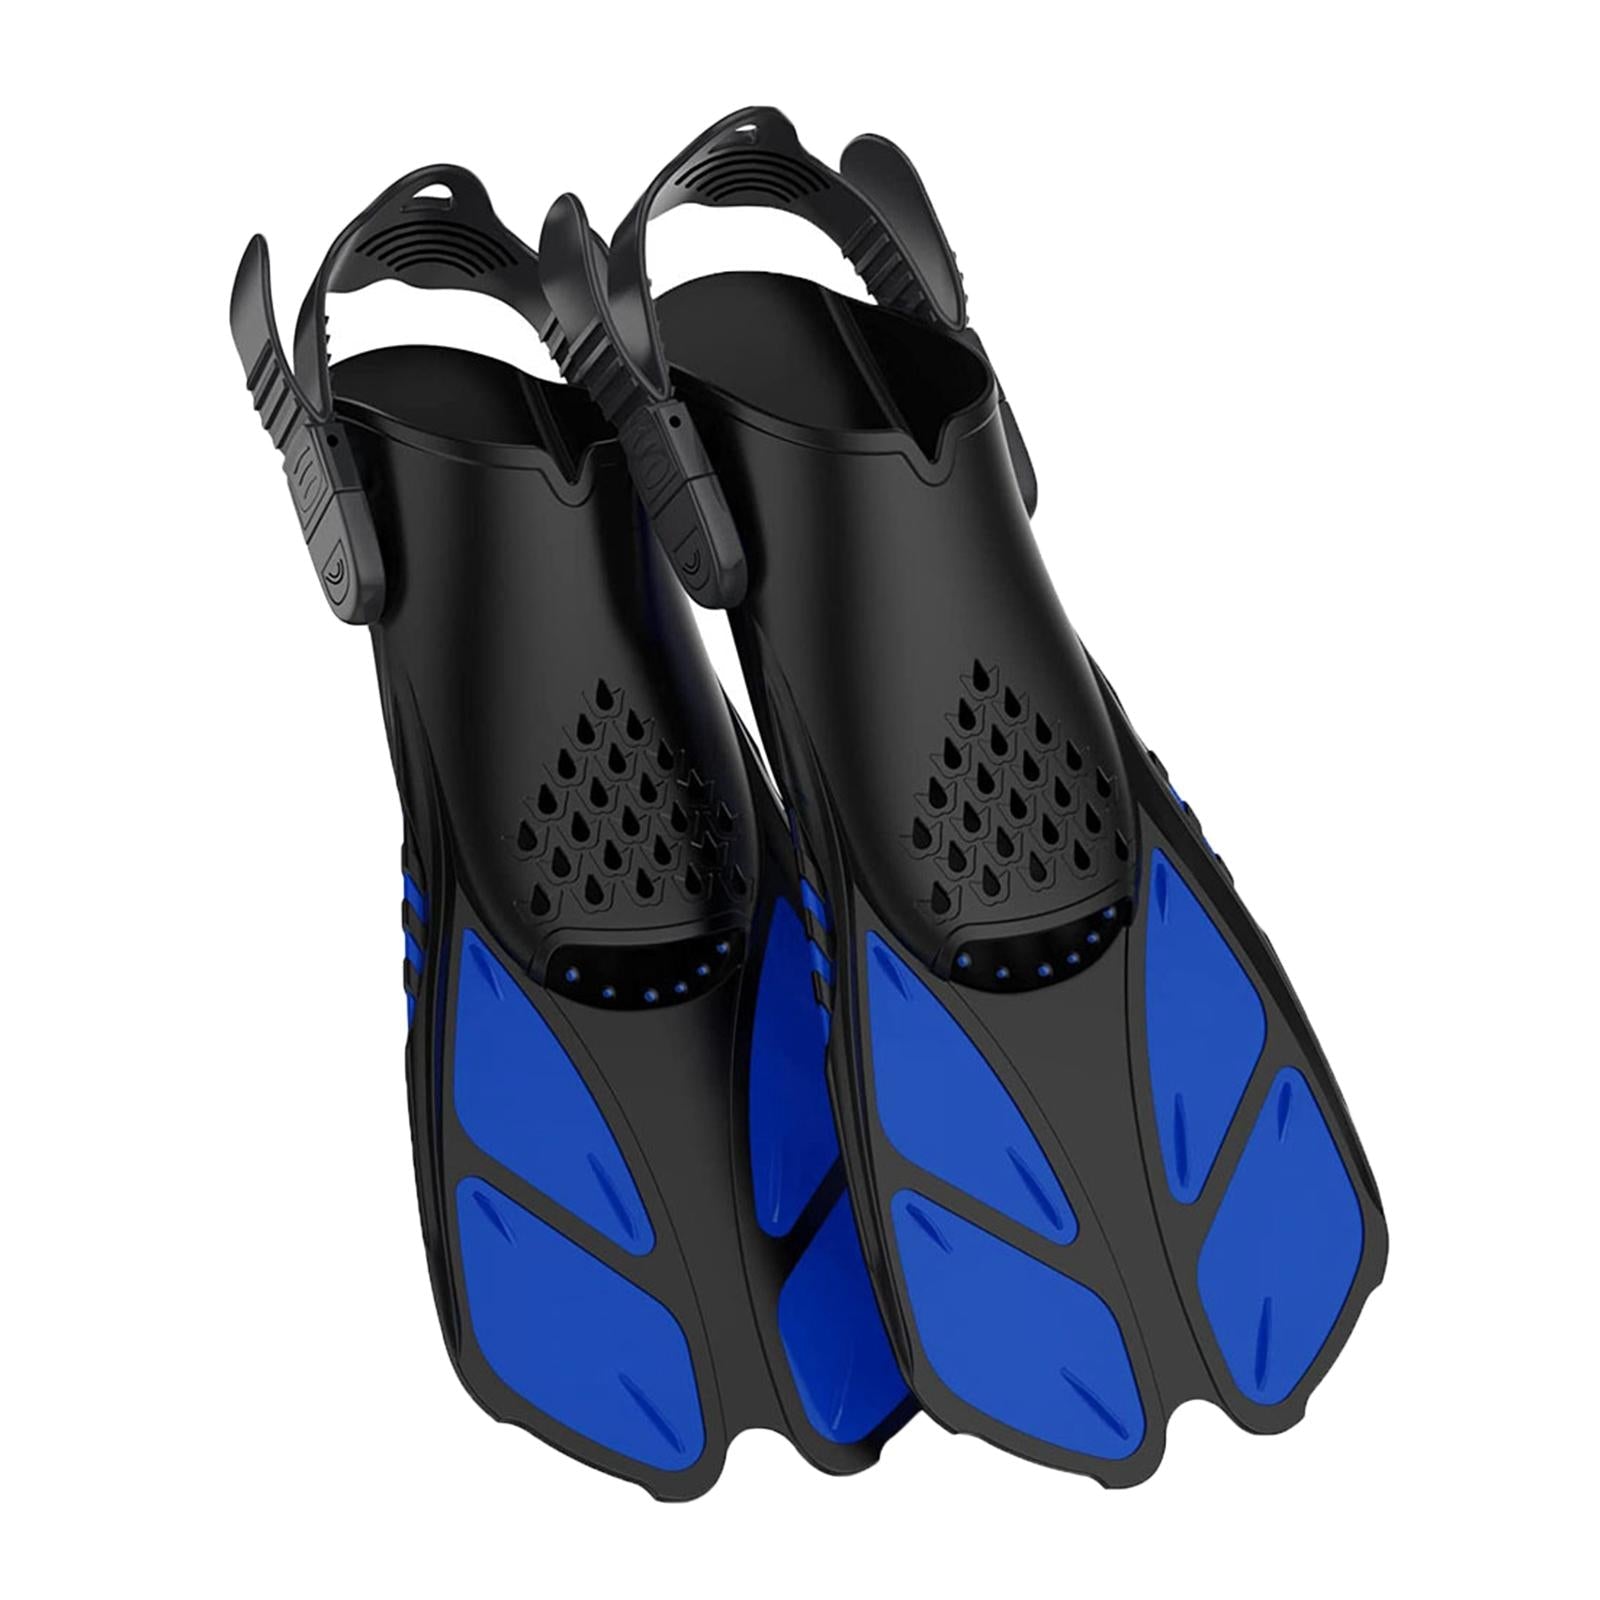 2Pcs Professional Swimming Flippers Swim for Snorkeling Adults M Size Blue